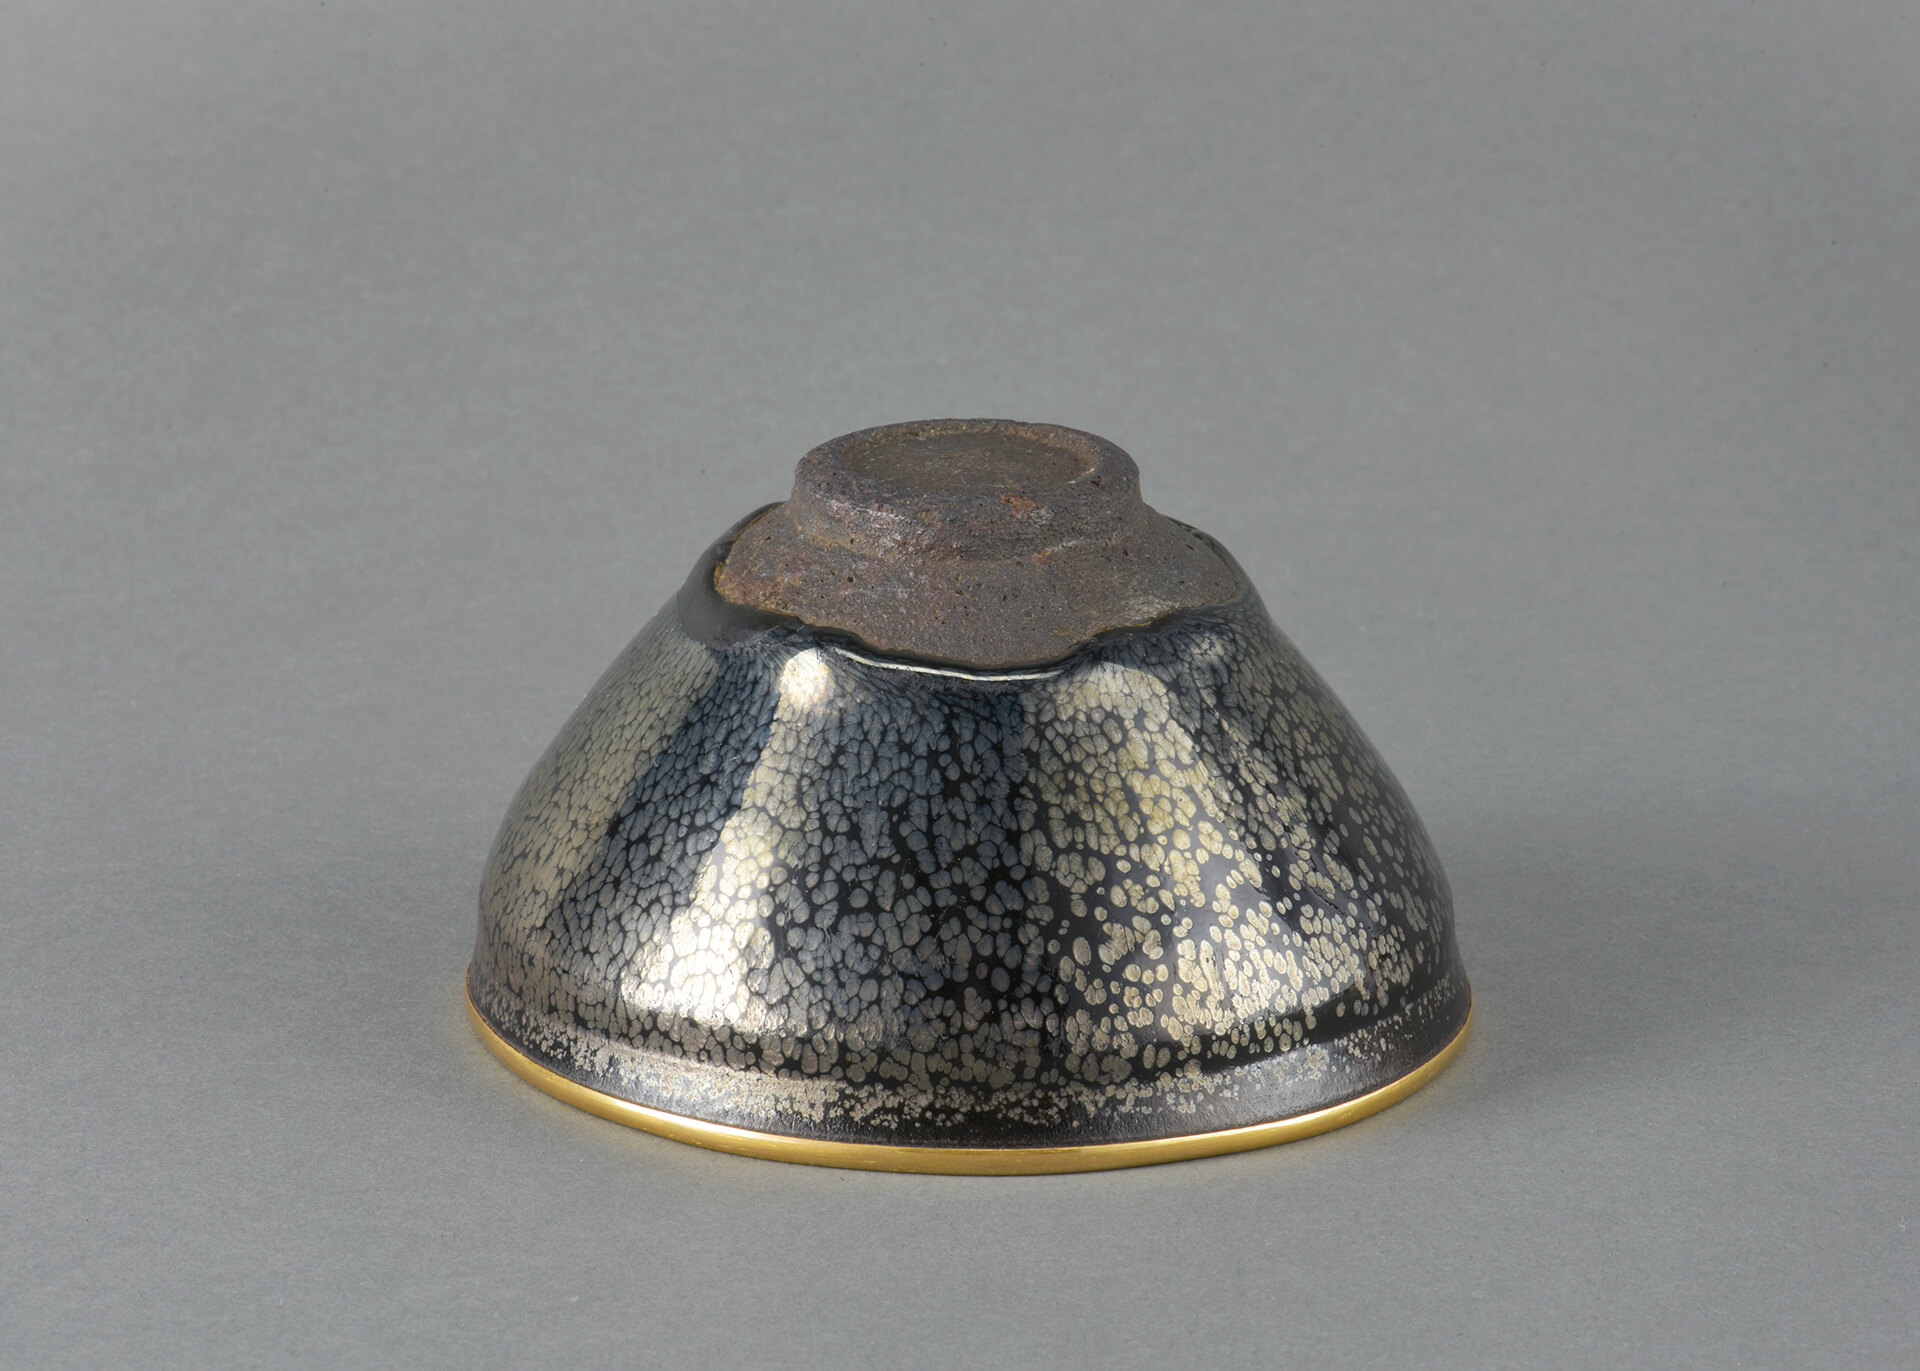 Southern Song dynasty, 12th-13th century Jian ware Tea bowl with silvery spots against Tenmoku glaze